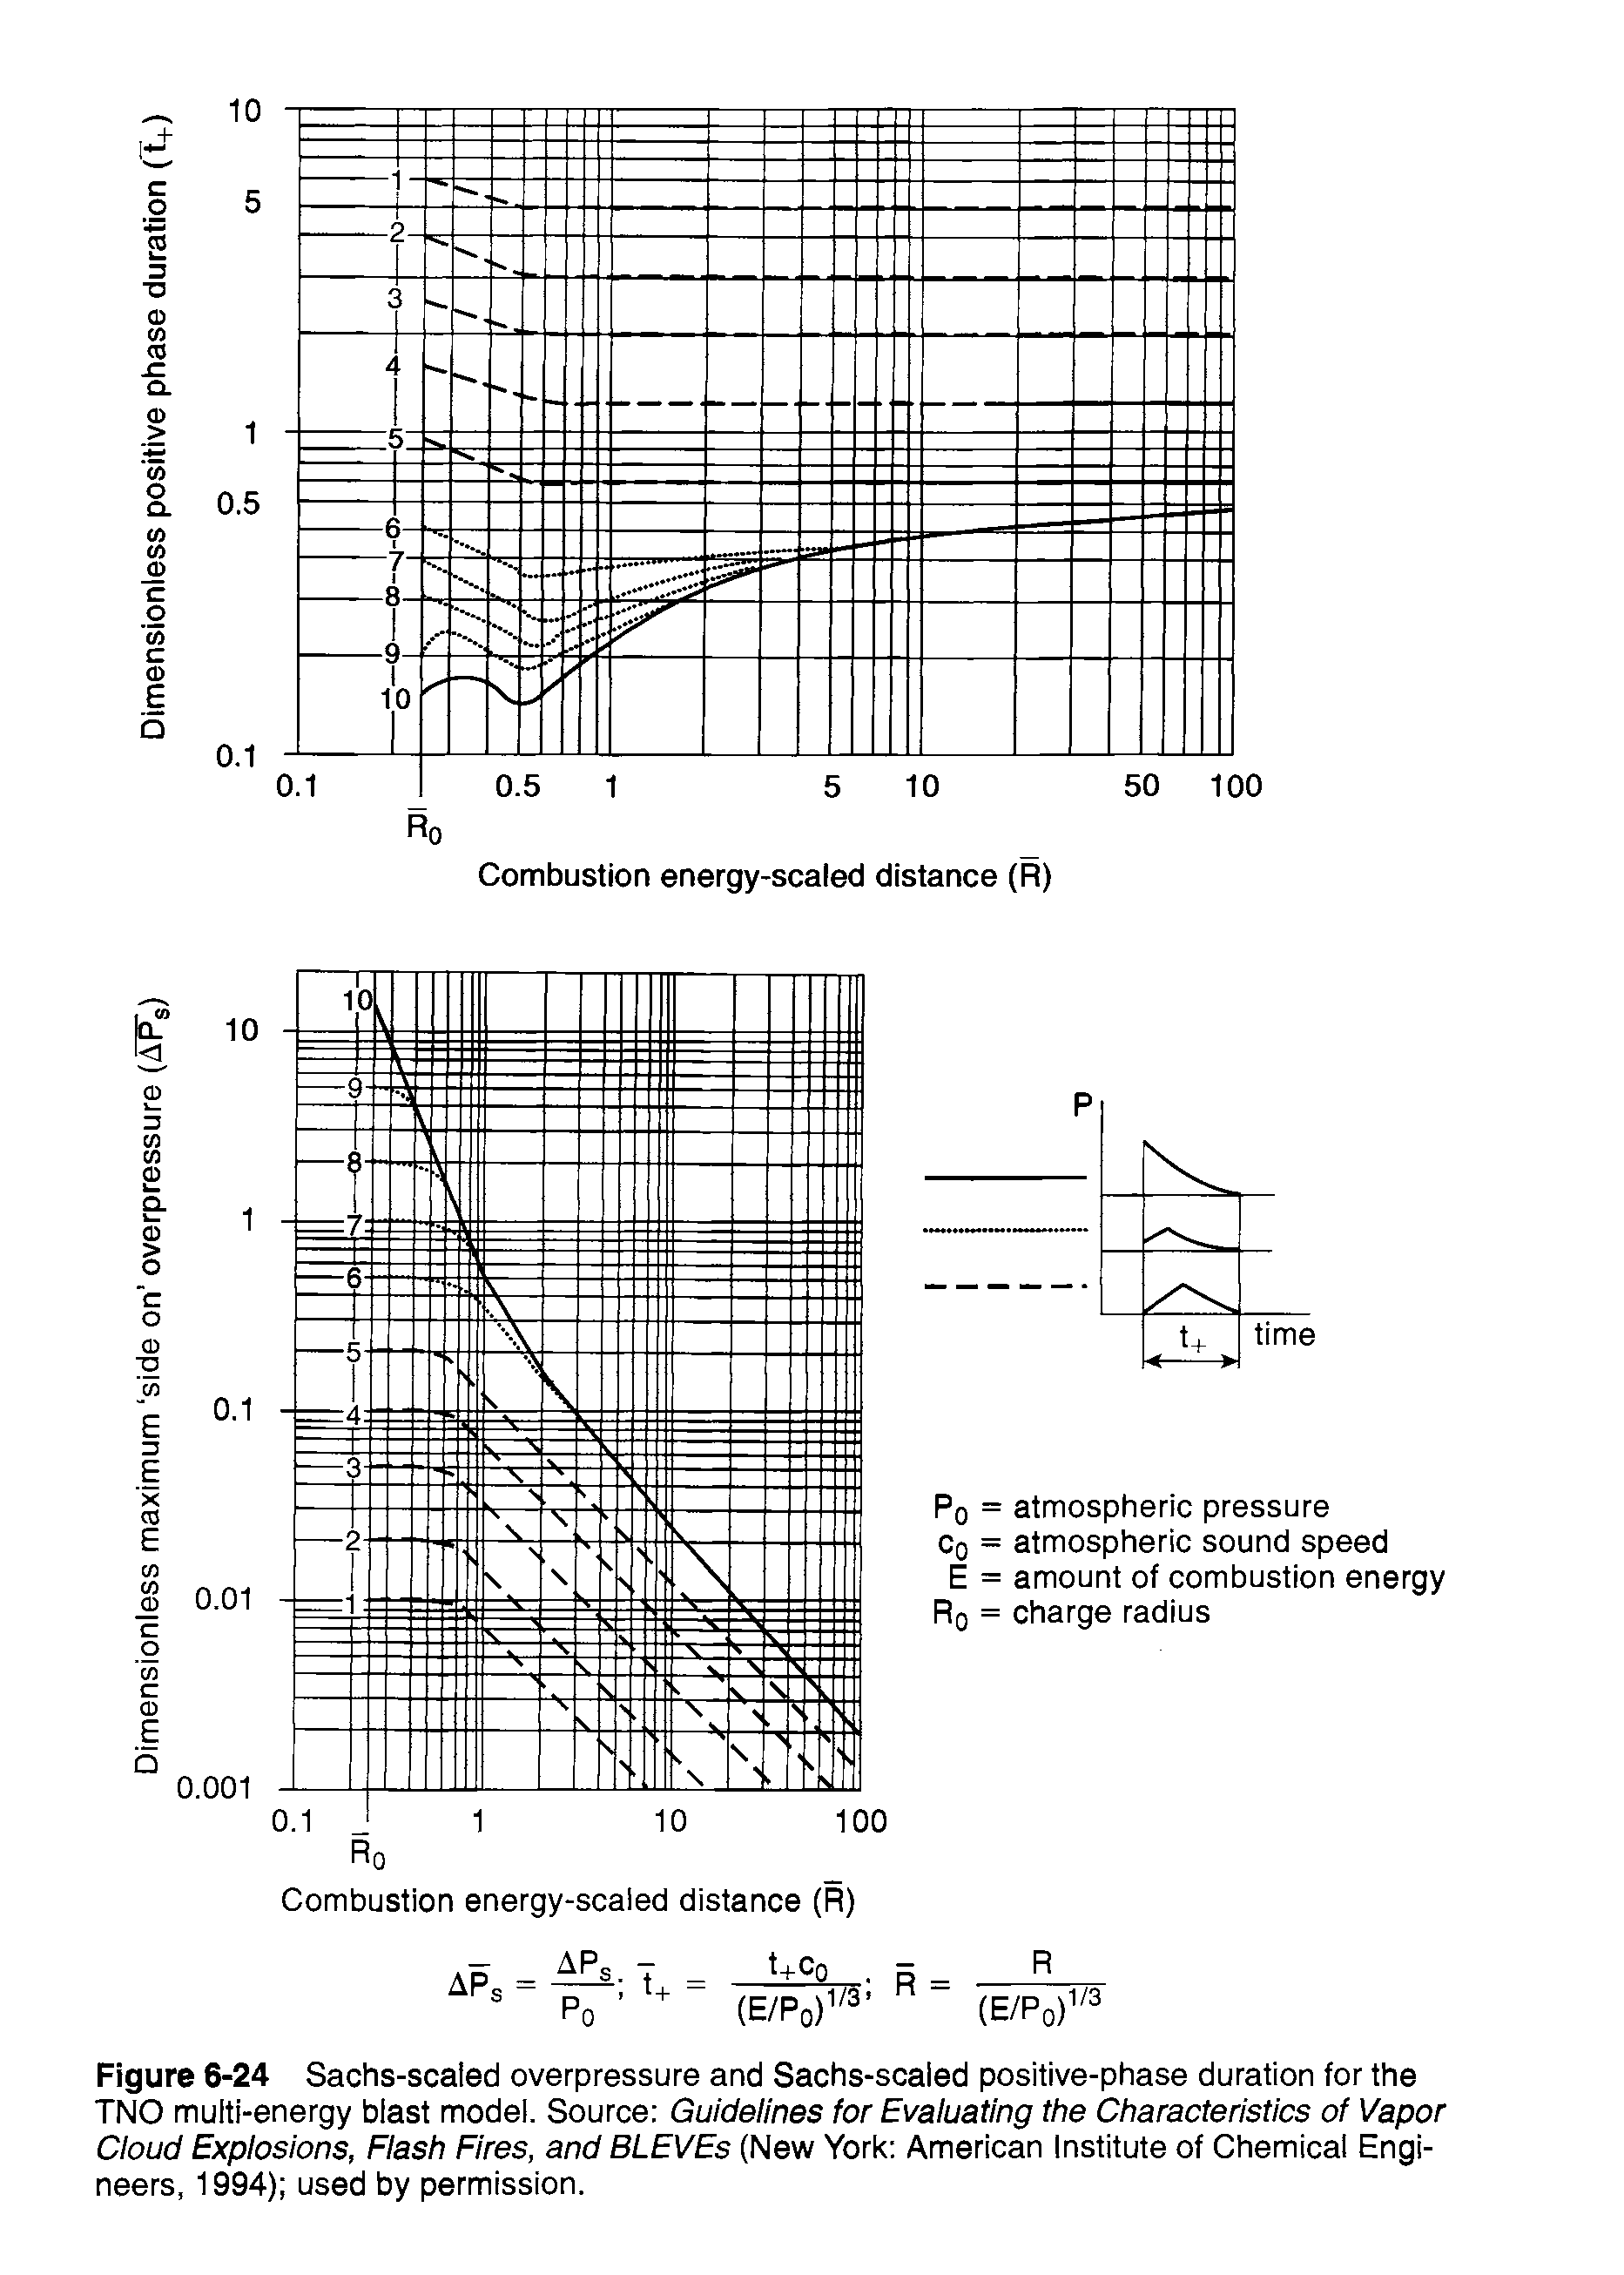 Figure 6-24 Sachs-scaled overpressure and Sachs-scaled positive-phase duration for the TNO multi-energy blast model. Source Guidelines for Evaluating the Characteristics of Vapor Cloud Explosions, Flash Fires, and BLEVEs (New York American Institute of Chemical Engineers, 1994) used by permission.